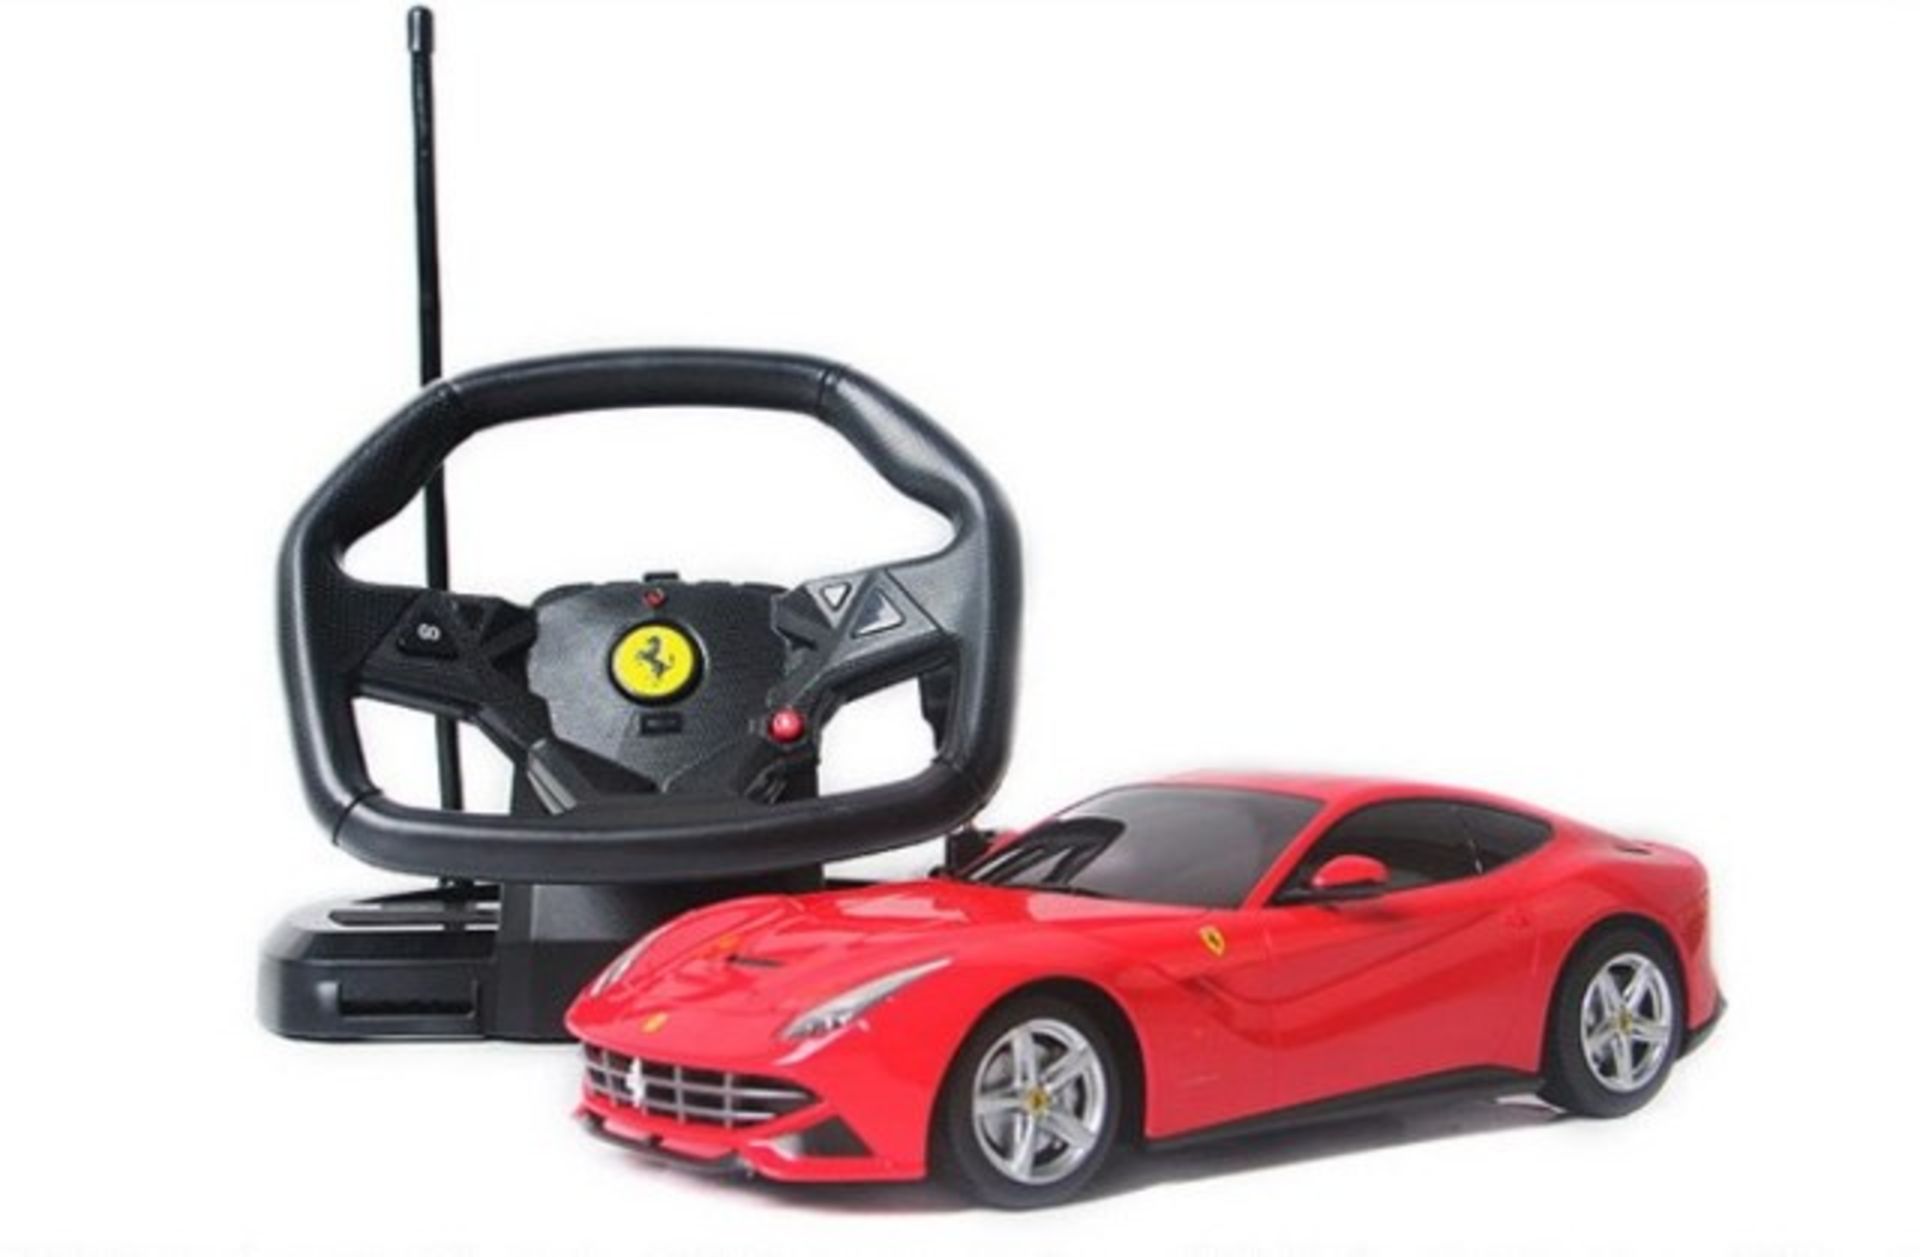 V Brand New 1/18 RC Ferrari F12 Berlinetta With Sound and Steering Wheel Controller - Official